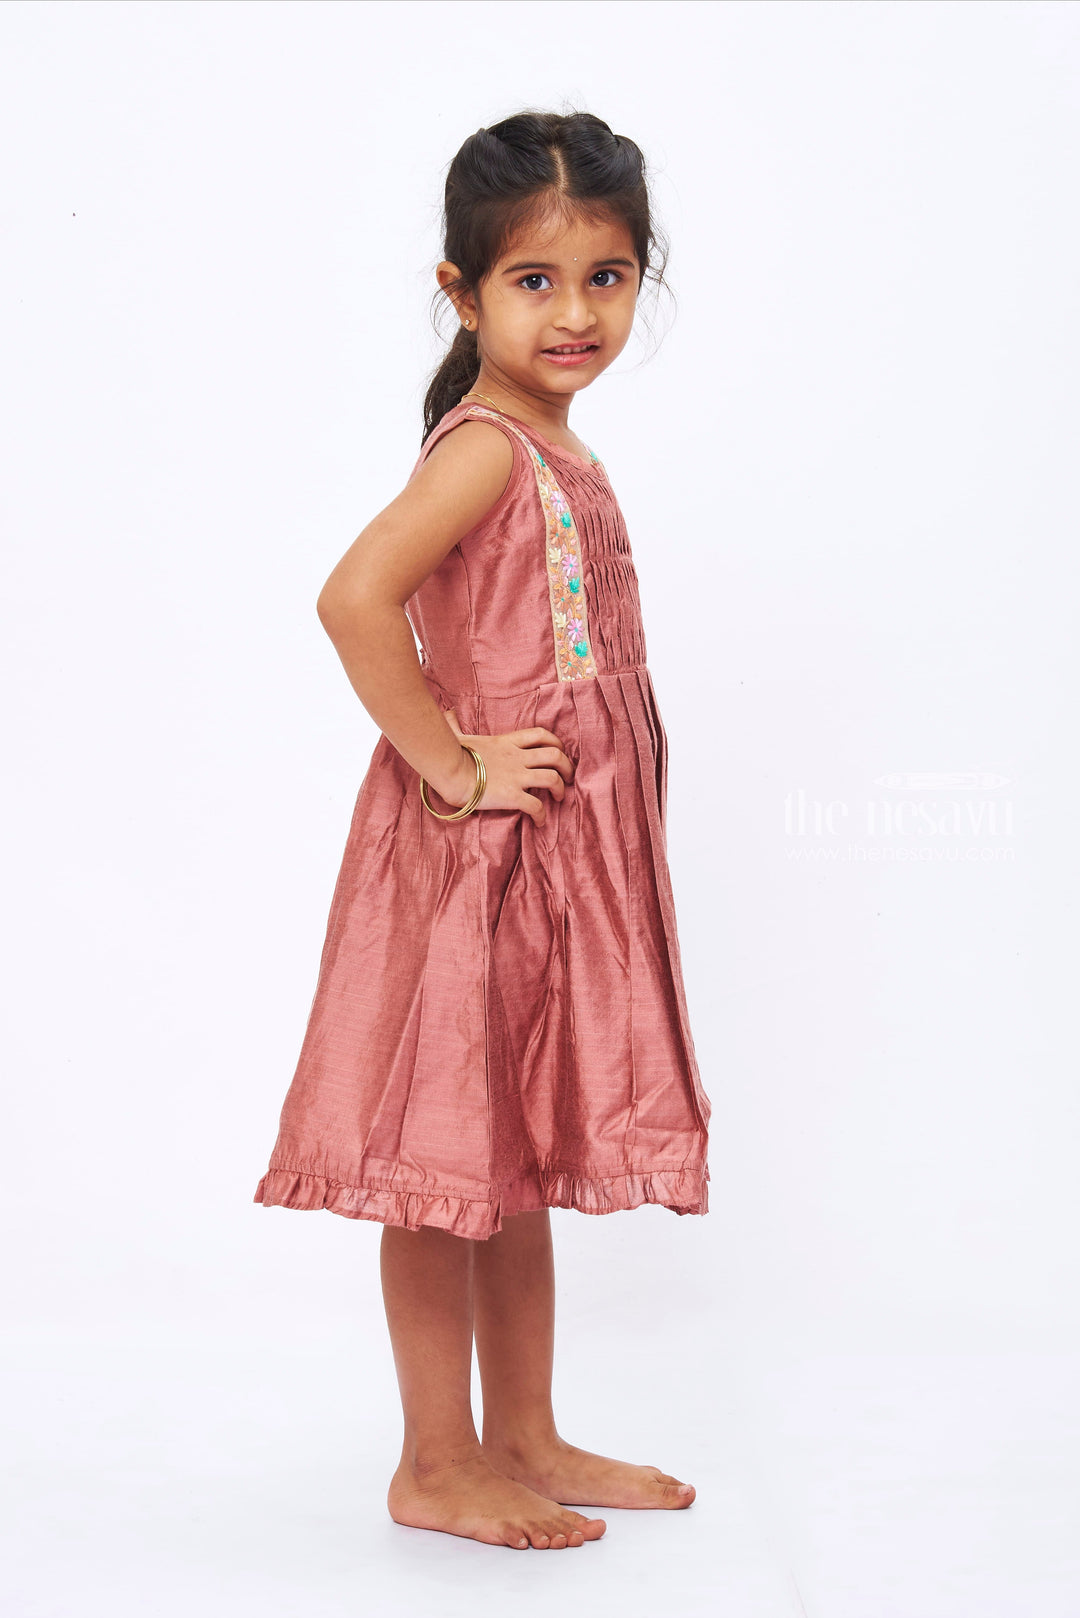 The Nesavu Girls Cotton Frock Pleated Brown Cotton Frock with Floral Lace Detailing for Girls Nesavu Girls' Brown Cotton Pleated Dress | Floral Lace Detail | Comfortable Casual Wear | The Nesavu